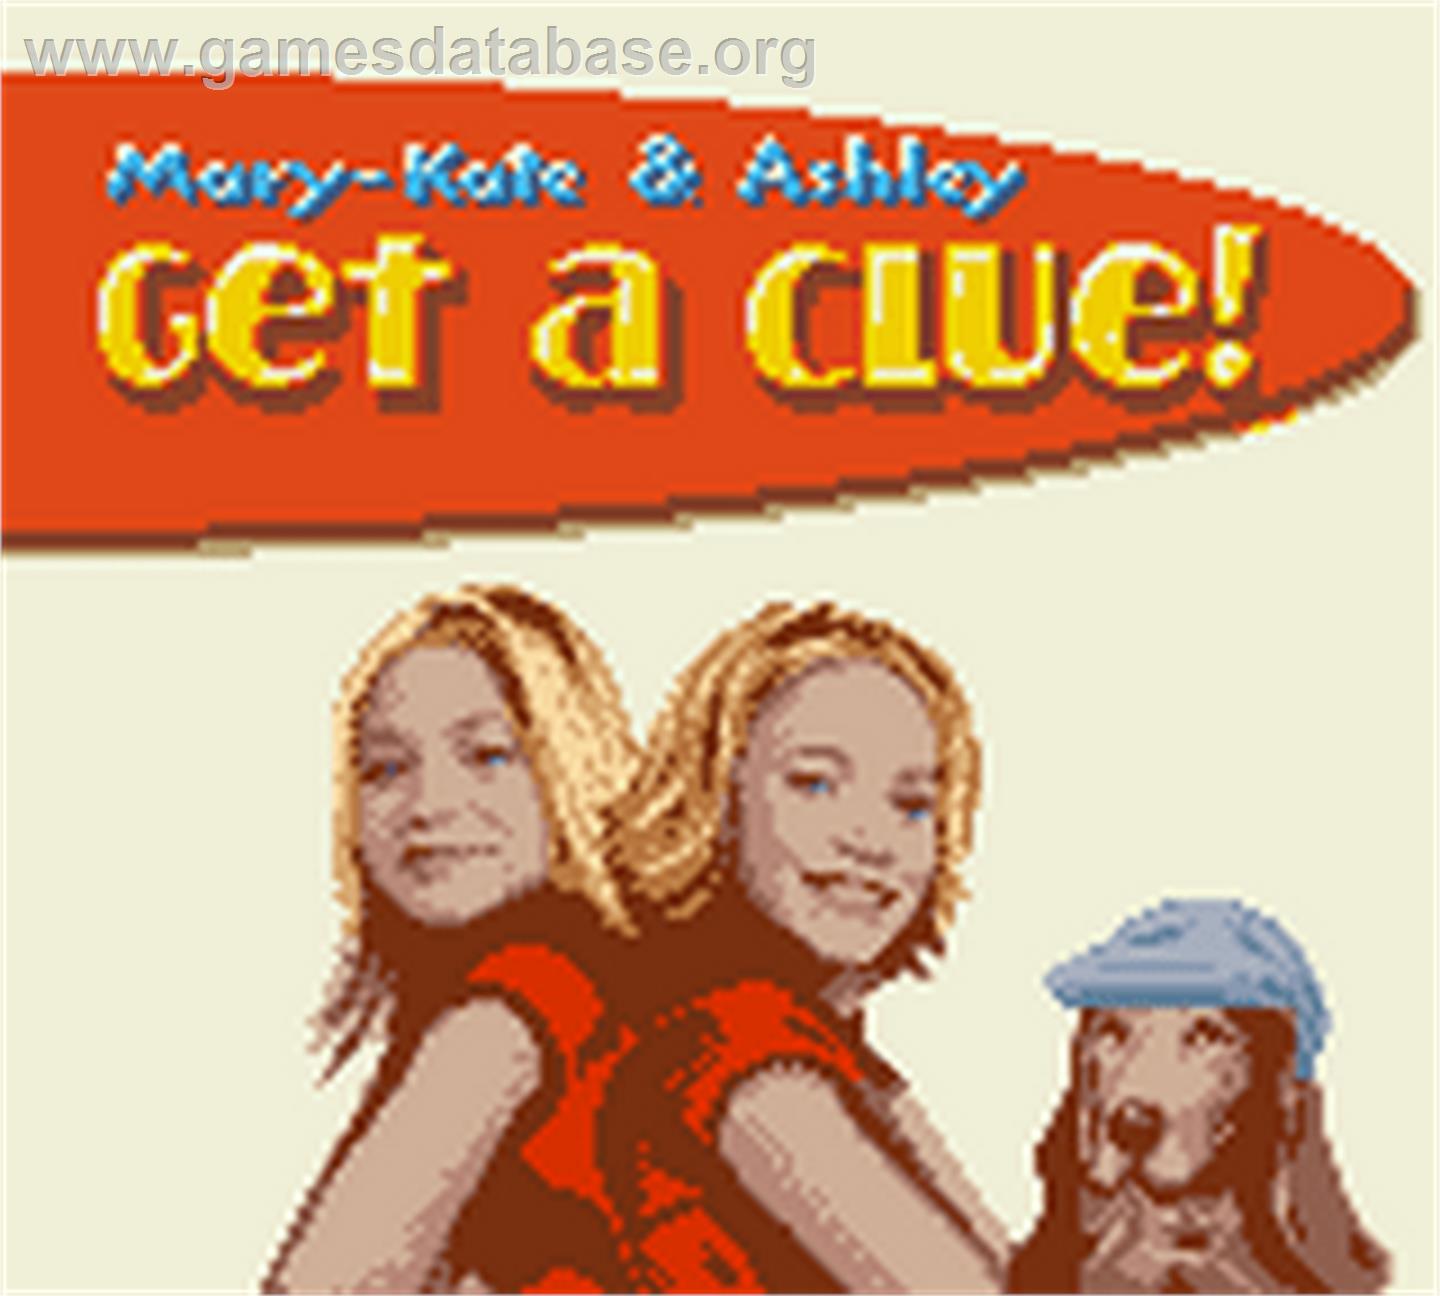 Mary-Kate and Ashley: Get a Clue - Nintendo Game Boy Color - Artwork - Title Screen